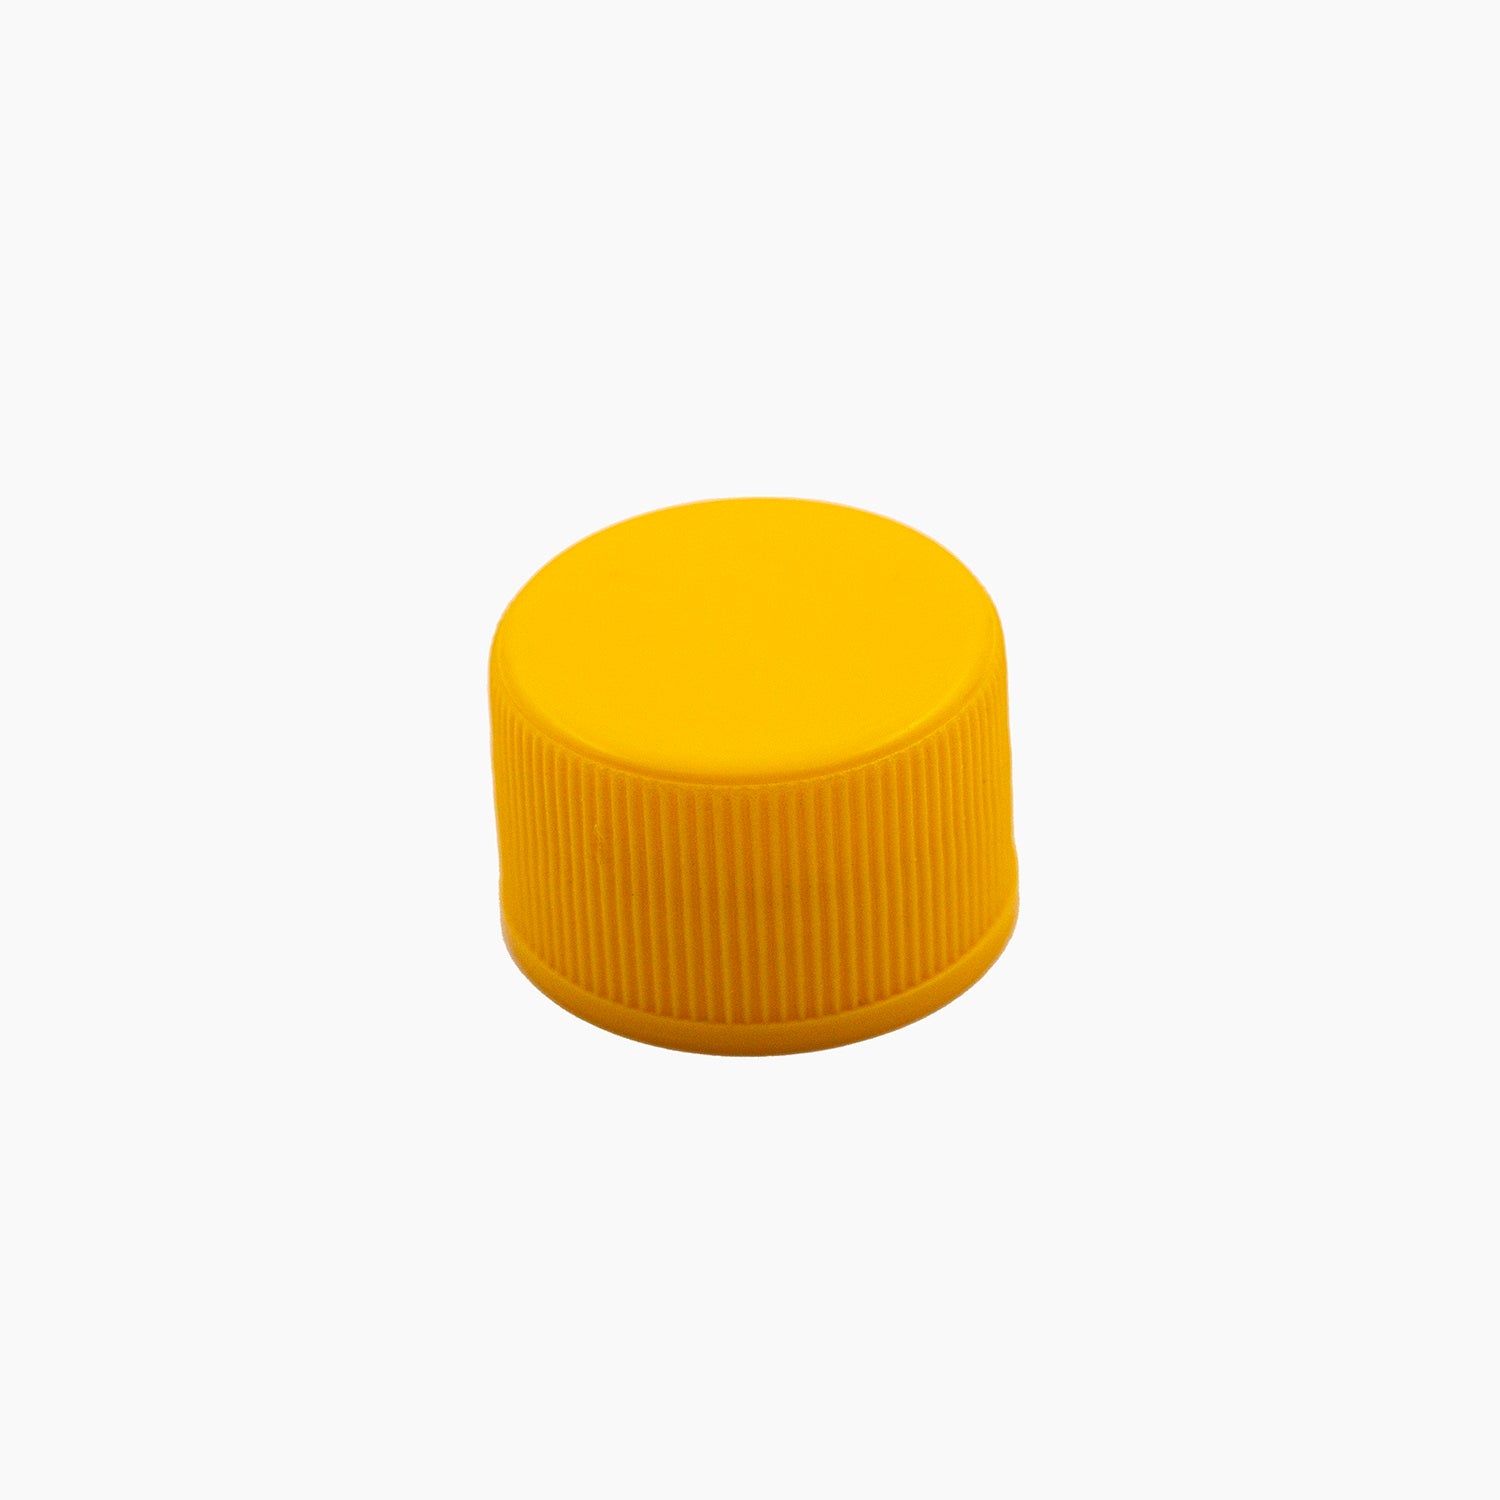 Yellow 24mm Plastic Standard EPE Liner Bottle Cap On White Background | Brightpack Closures And Accessories